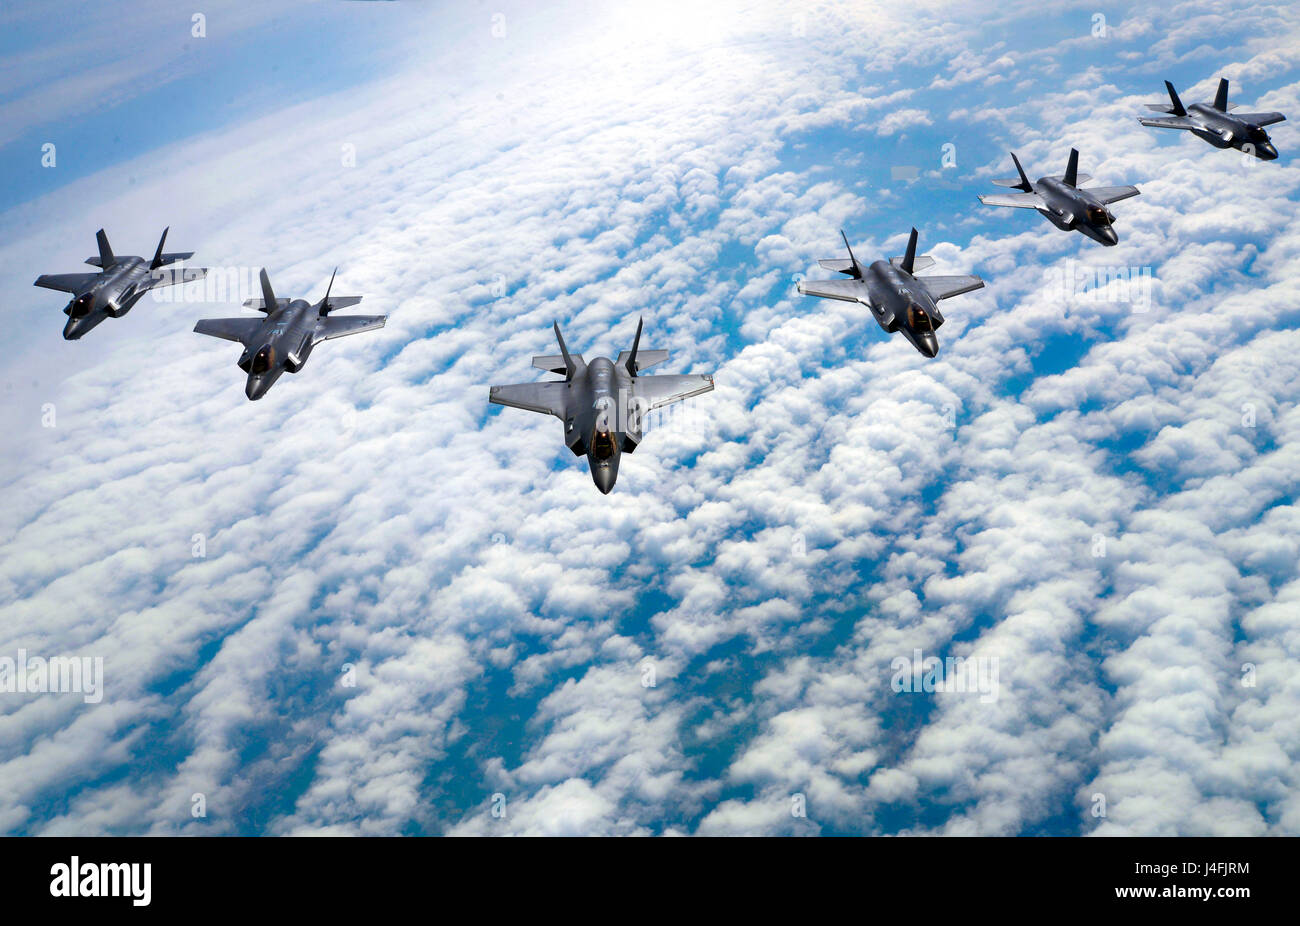 F-35 Lightning II's fly in formation during a training flight Stock Photo